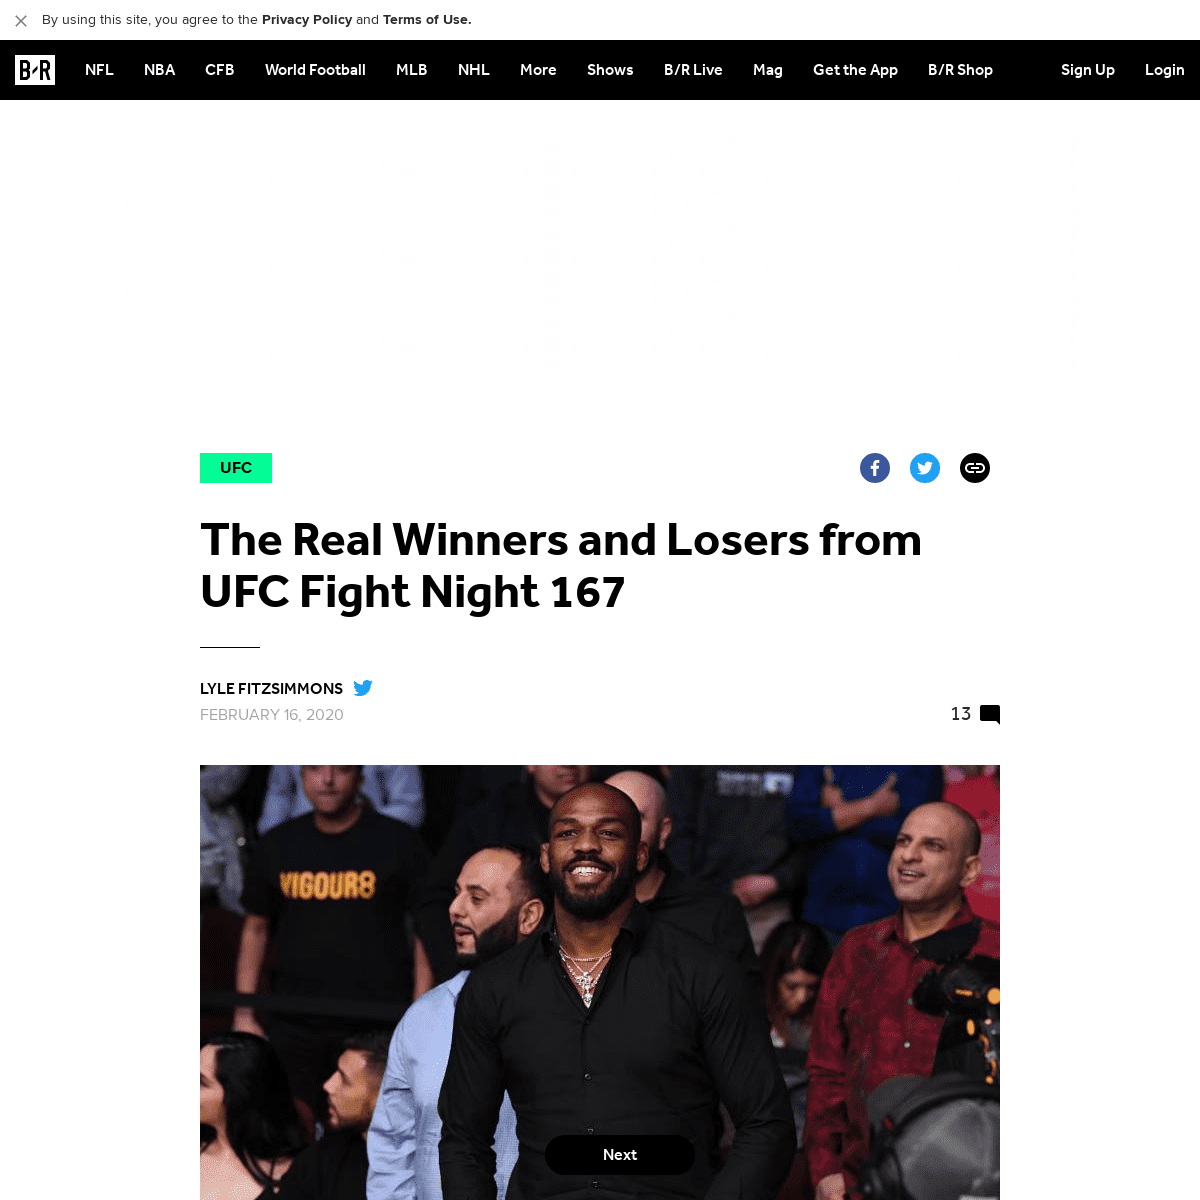 A complete backup of bleacherreport.com/articles/2876533-the-real-winners-and-losers-from-ufc-fight-night-167